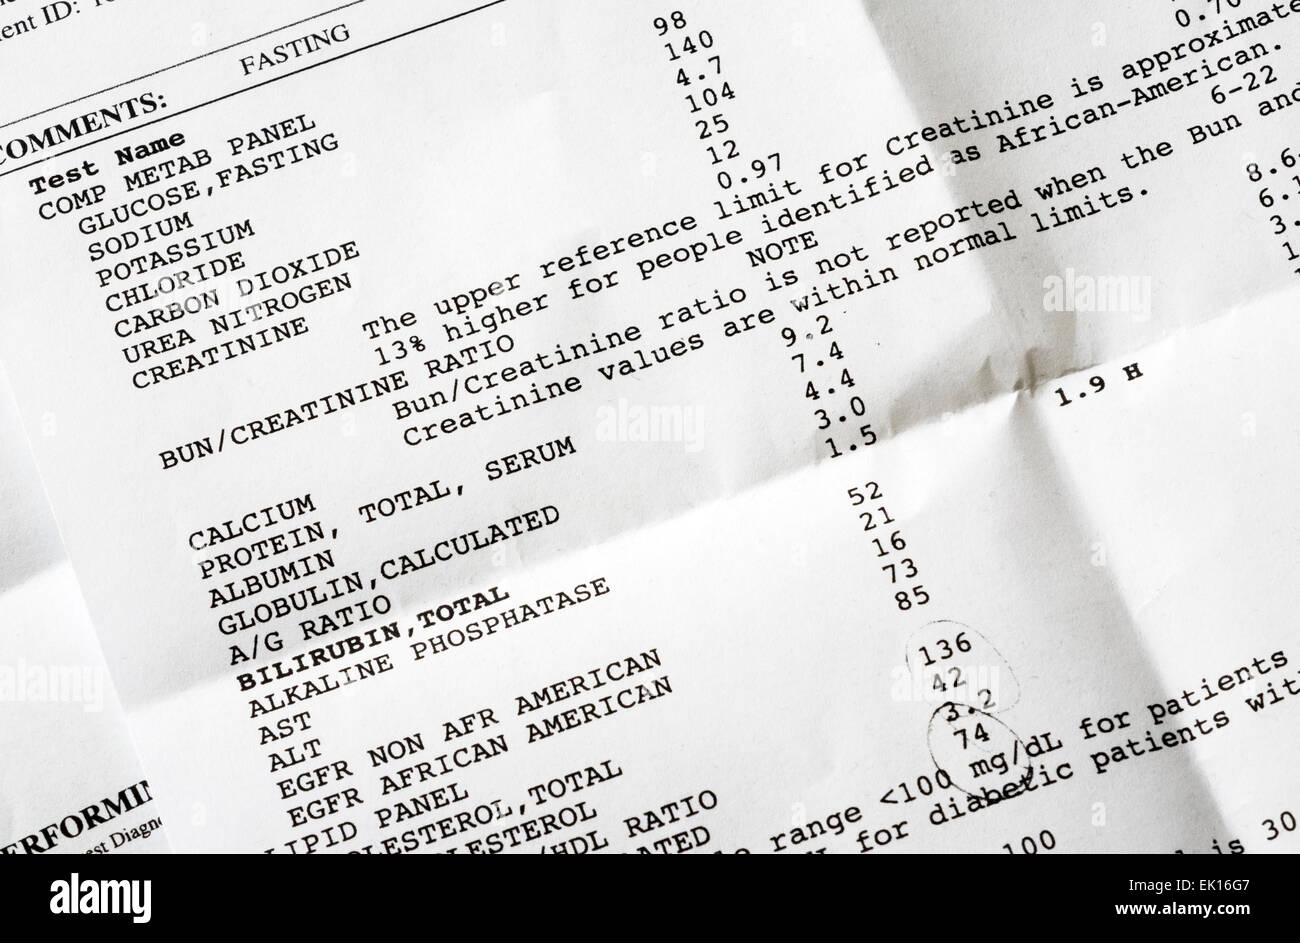 Closeup of a printed page of the results of blood tests Stock Photo